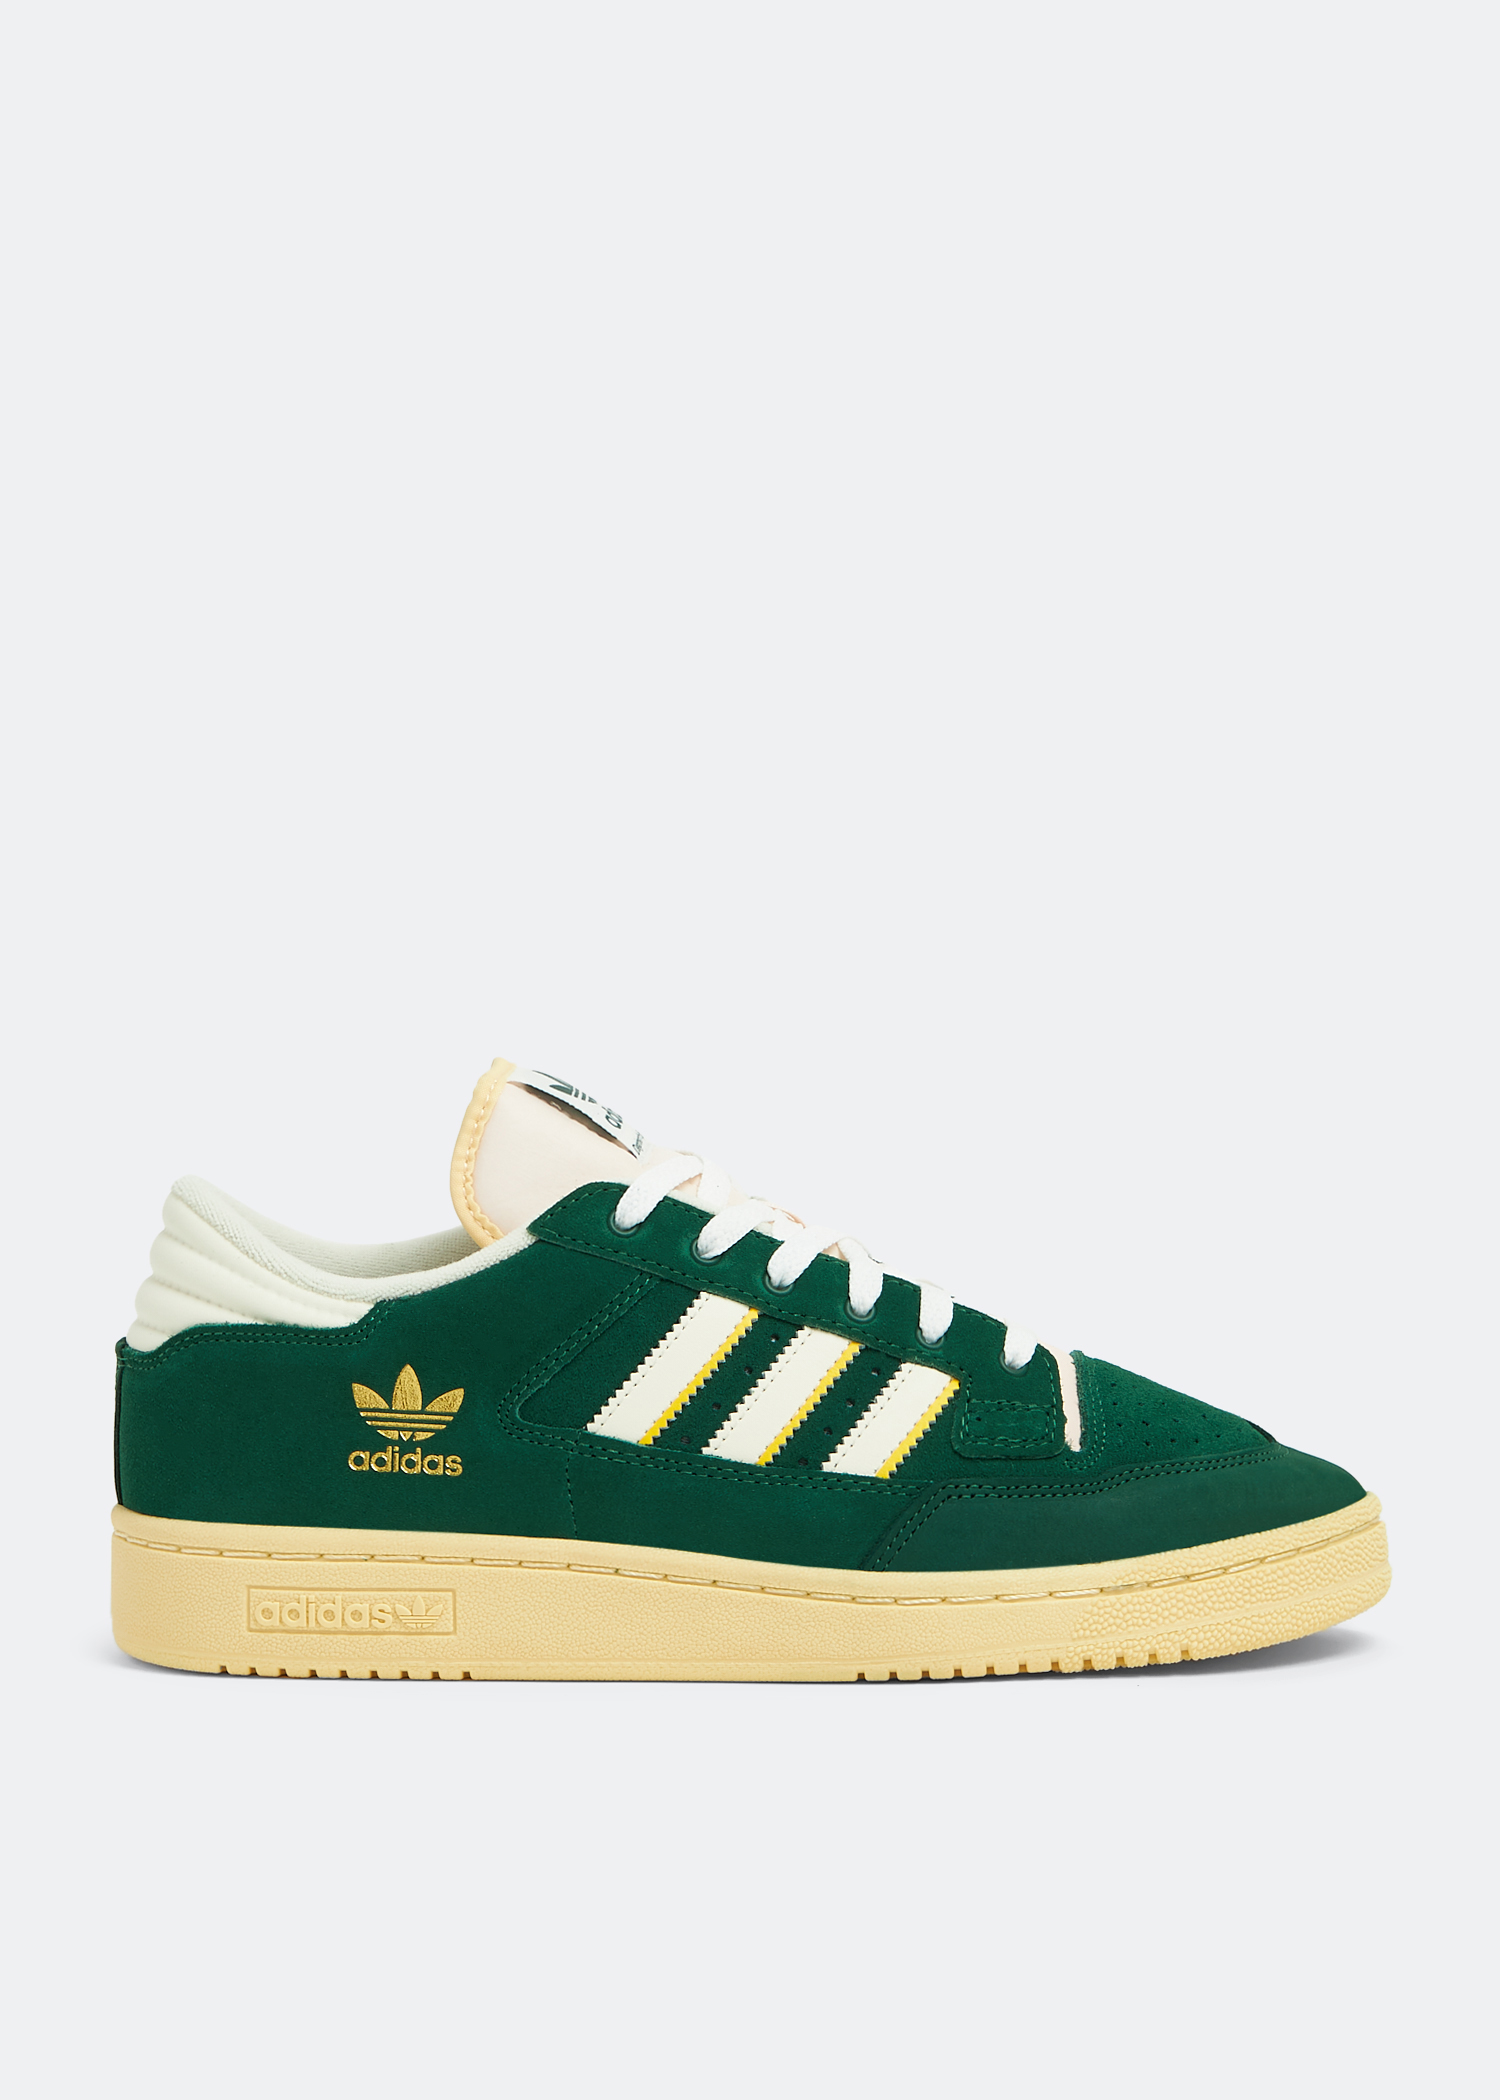 Adidas Centennial 85 Low sneakers for Men - Green in KSA | Level Shoes